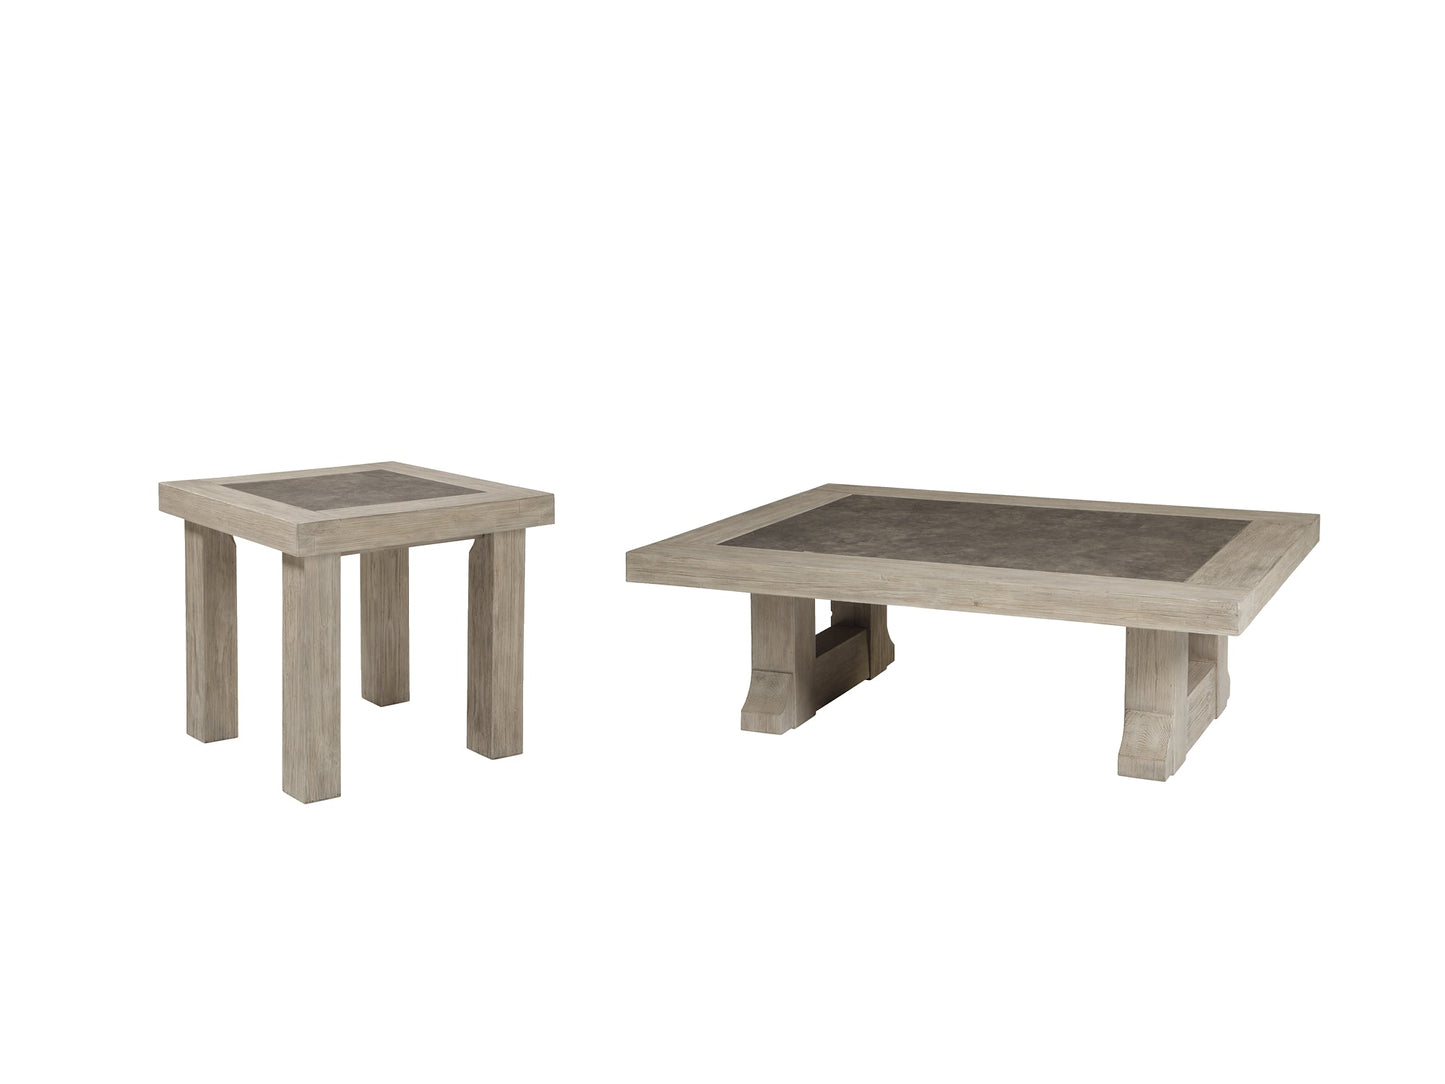 Hennington Coffee Table with 1 End Table Rent Wise Rent To Own Jacksonville, Florida